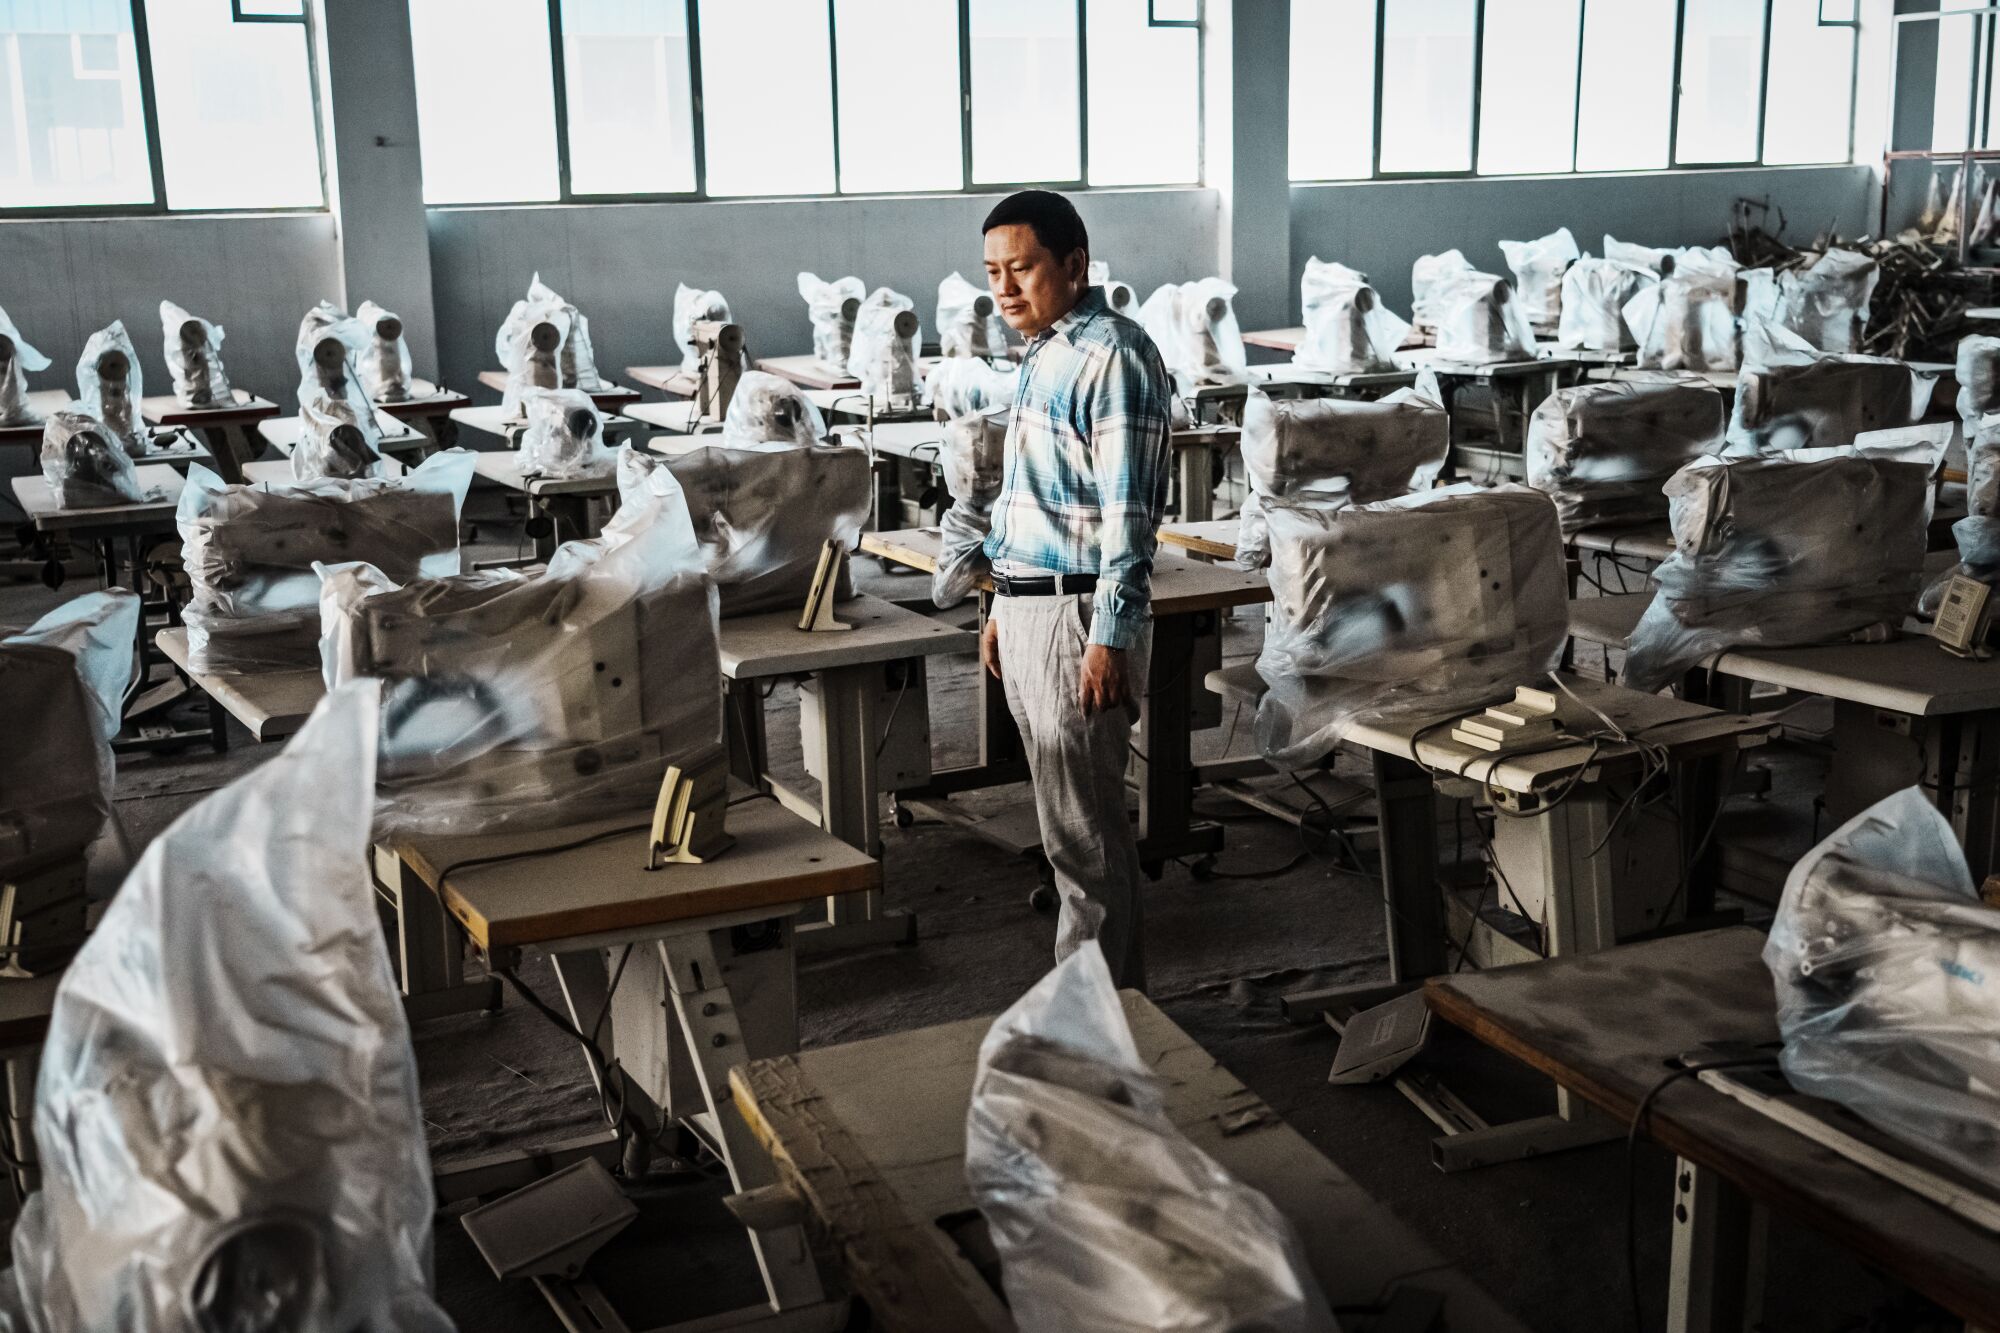 A man stands among sewing machines wrapped in plastic covers